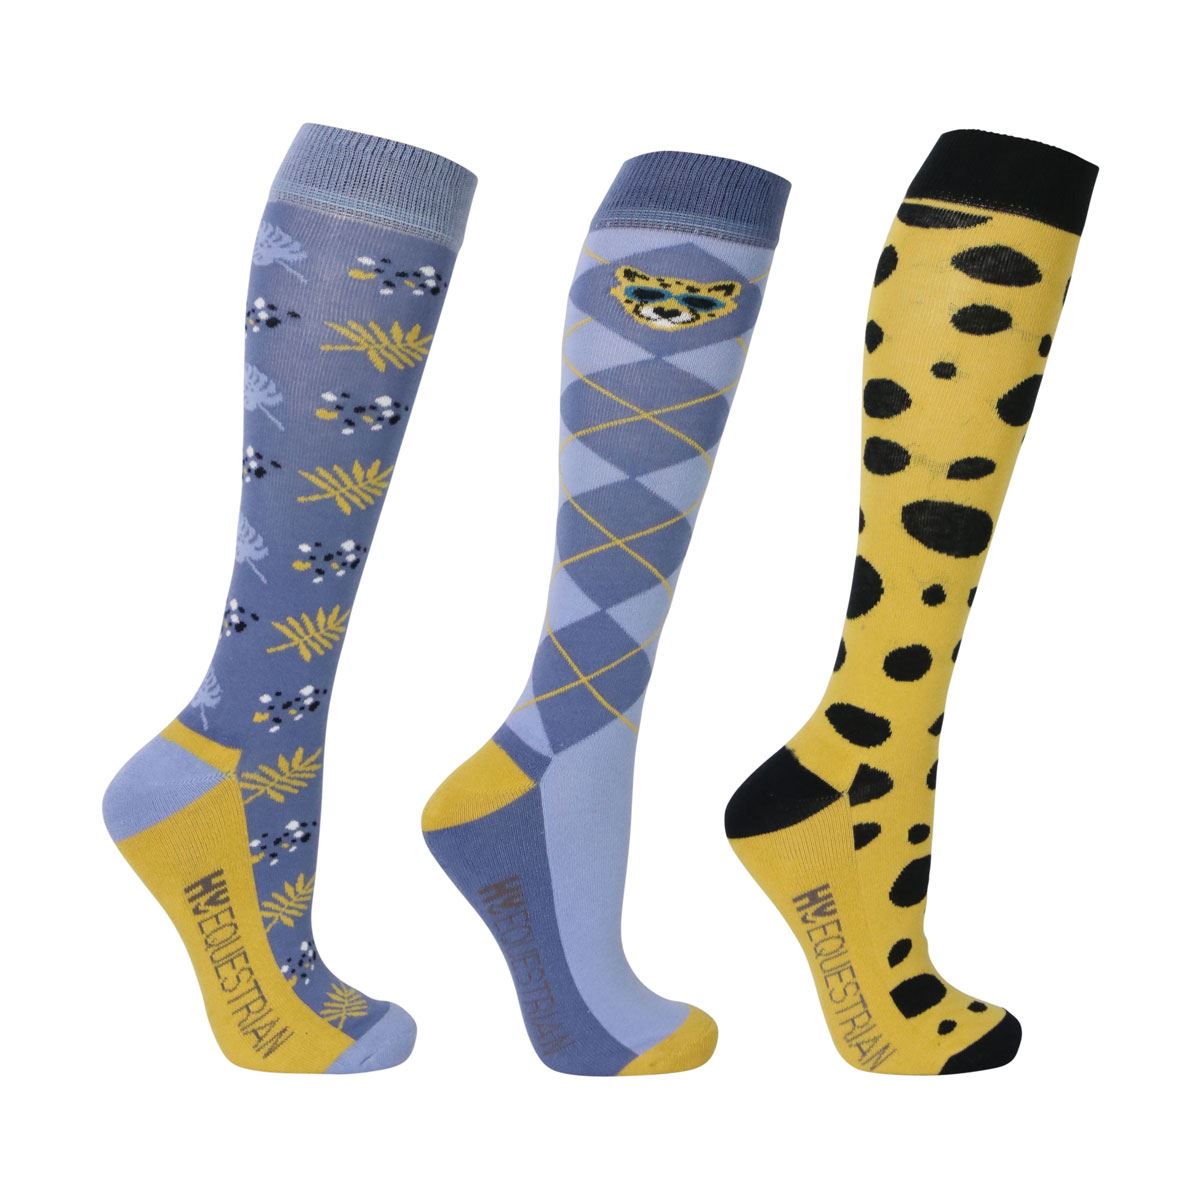 Hy Equestrian Chico the Cheetah Socks (Pack of 3) - Just Horse Riders